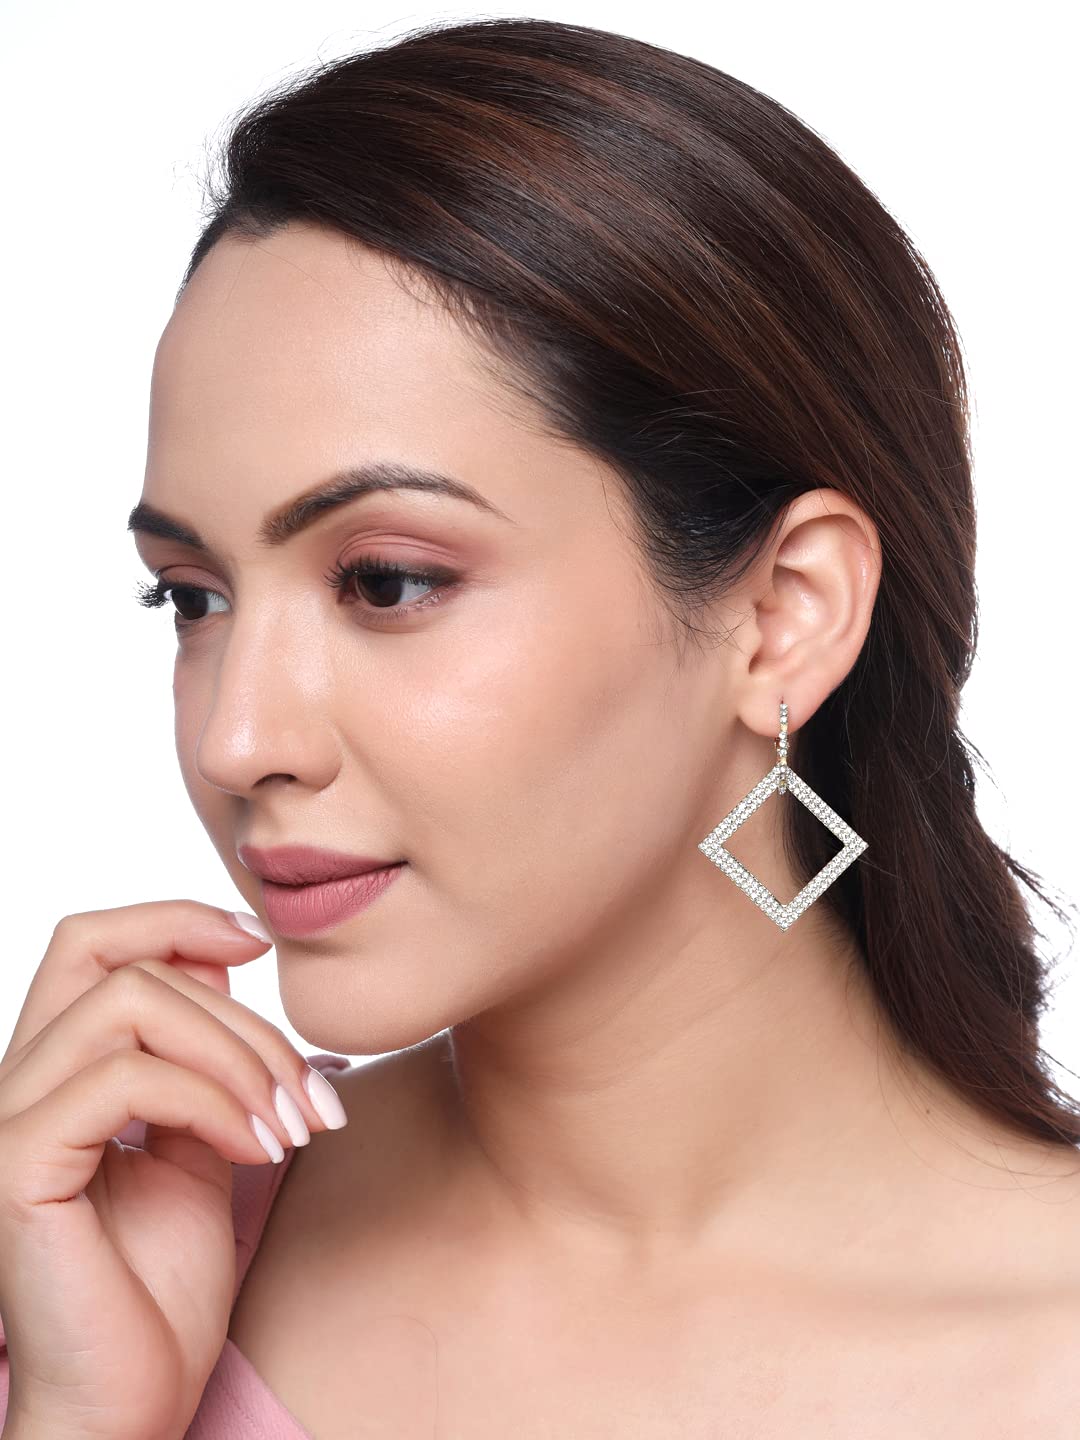 Yellow Chimes Earrings for Women and Girls Silver Gold Hoops